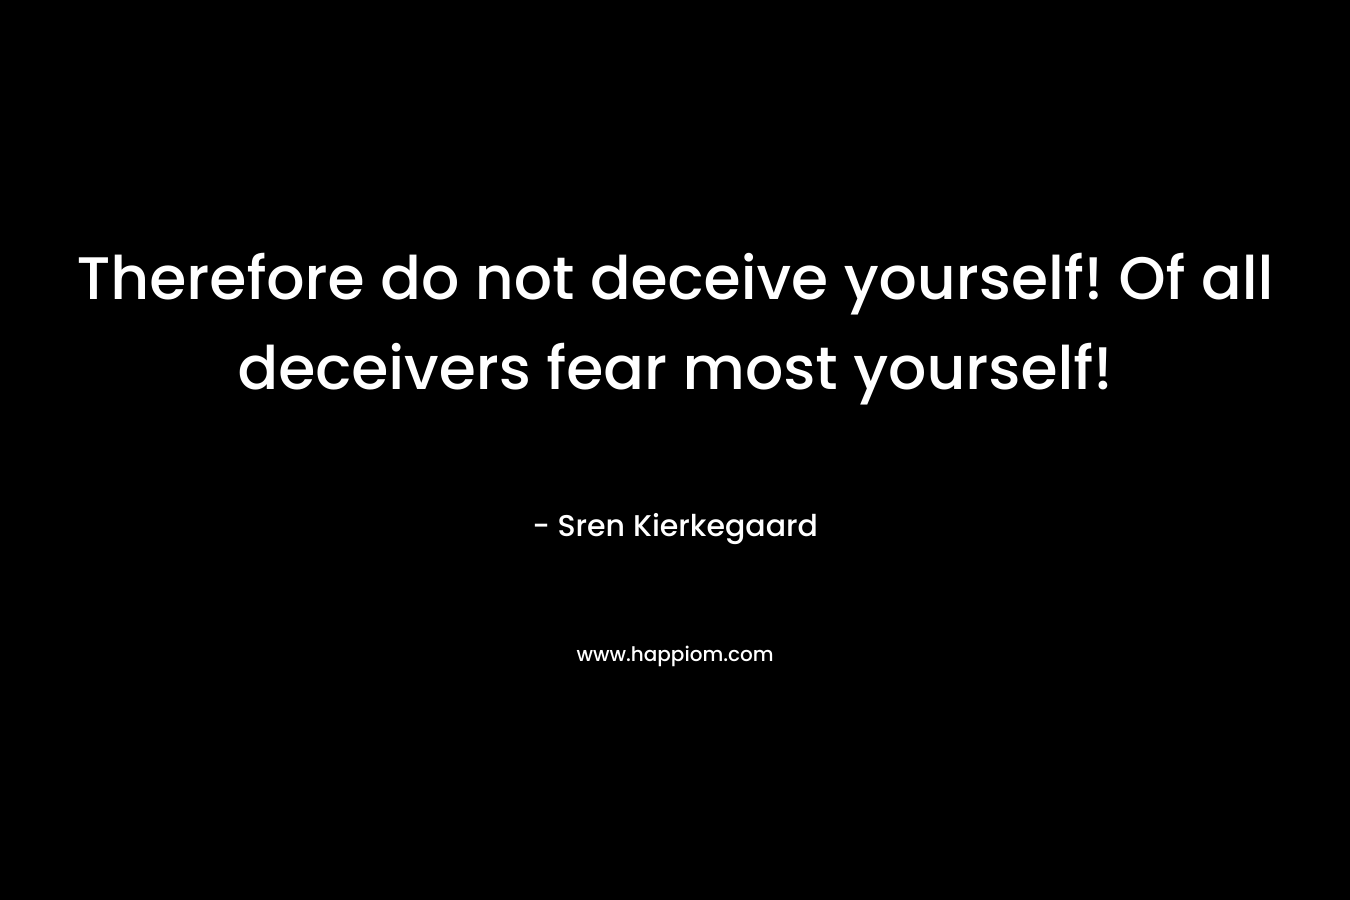 Therefore do not deceive yourself! Of all deceivers fear most yourself! – Sren Kierkegaard